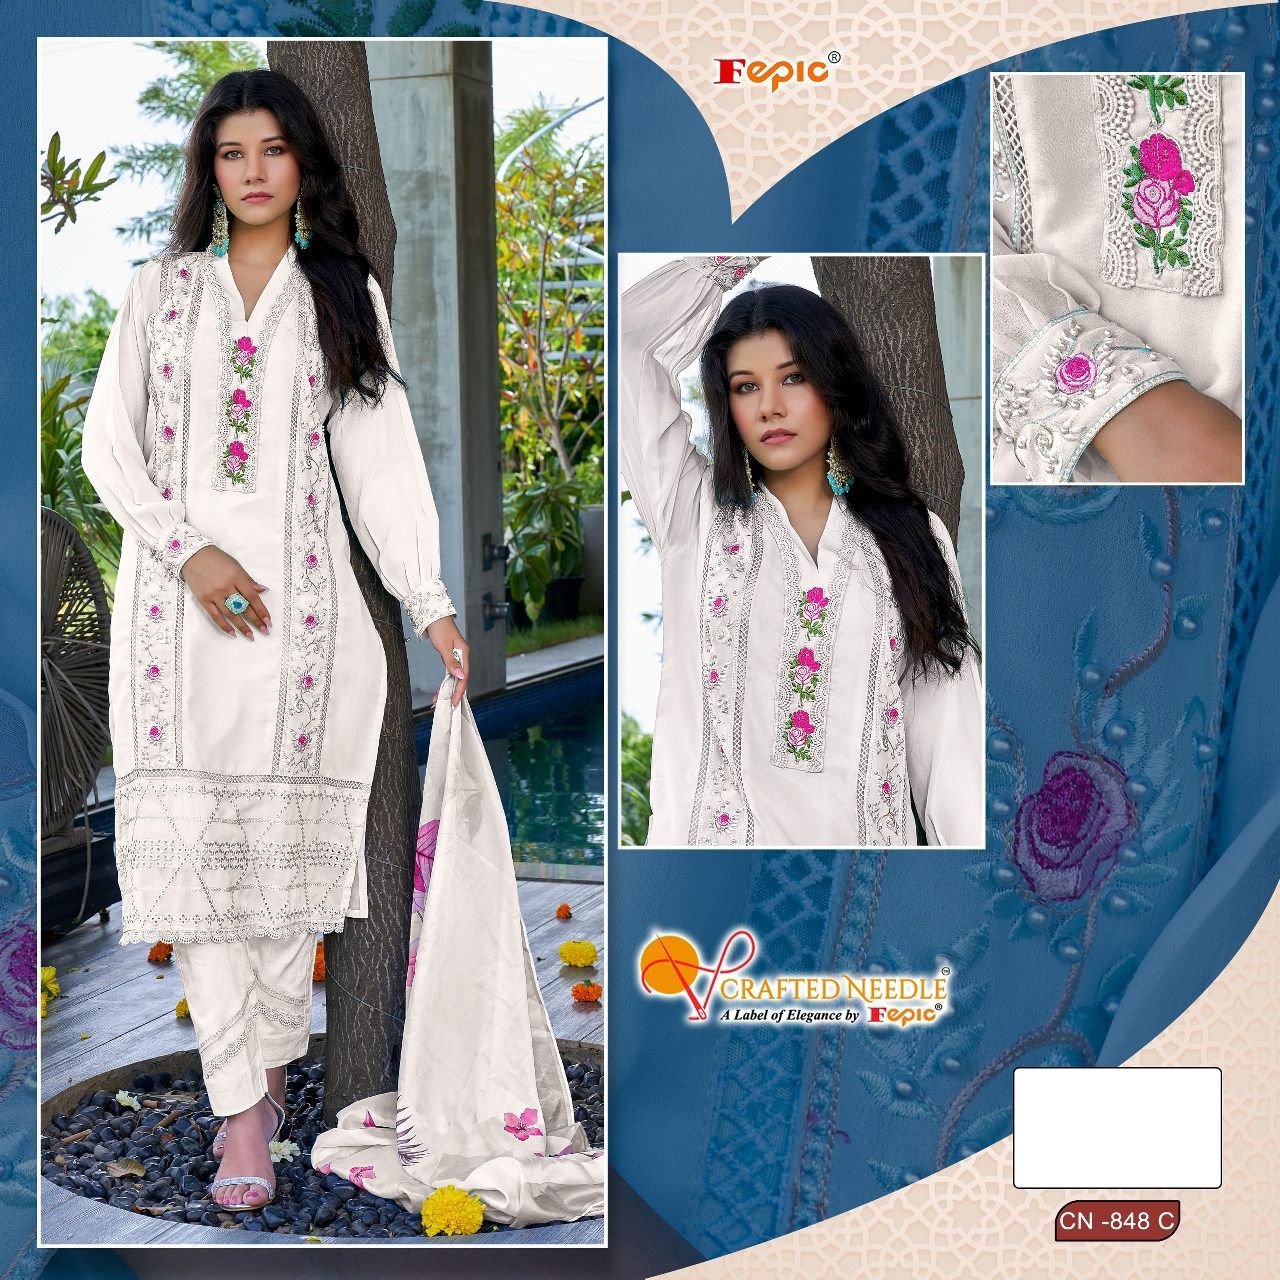 Cn 848 Crafted Needle Georgette Pakistani Readymade Suits